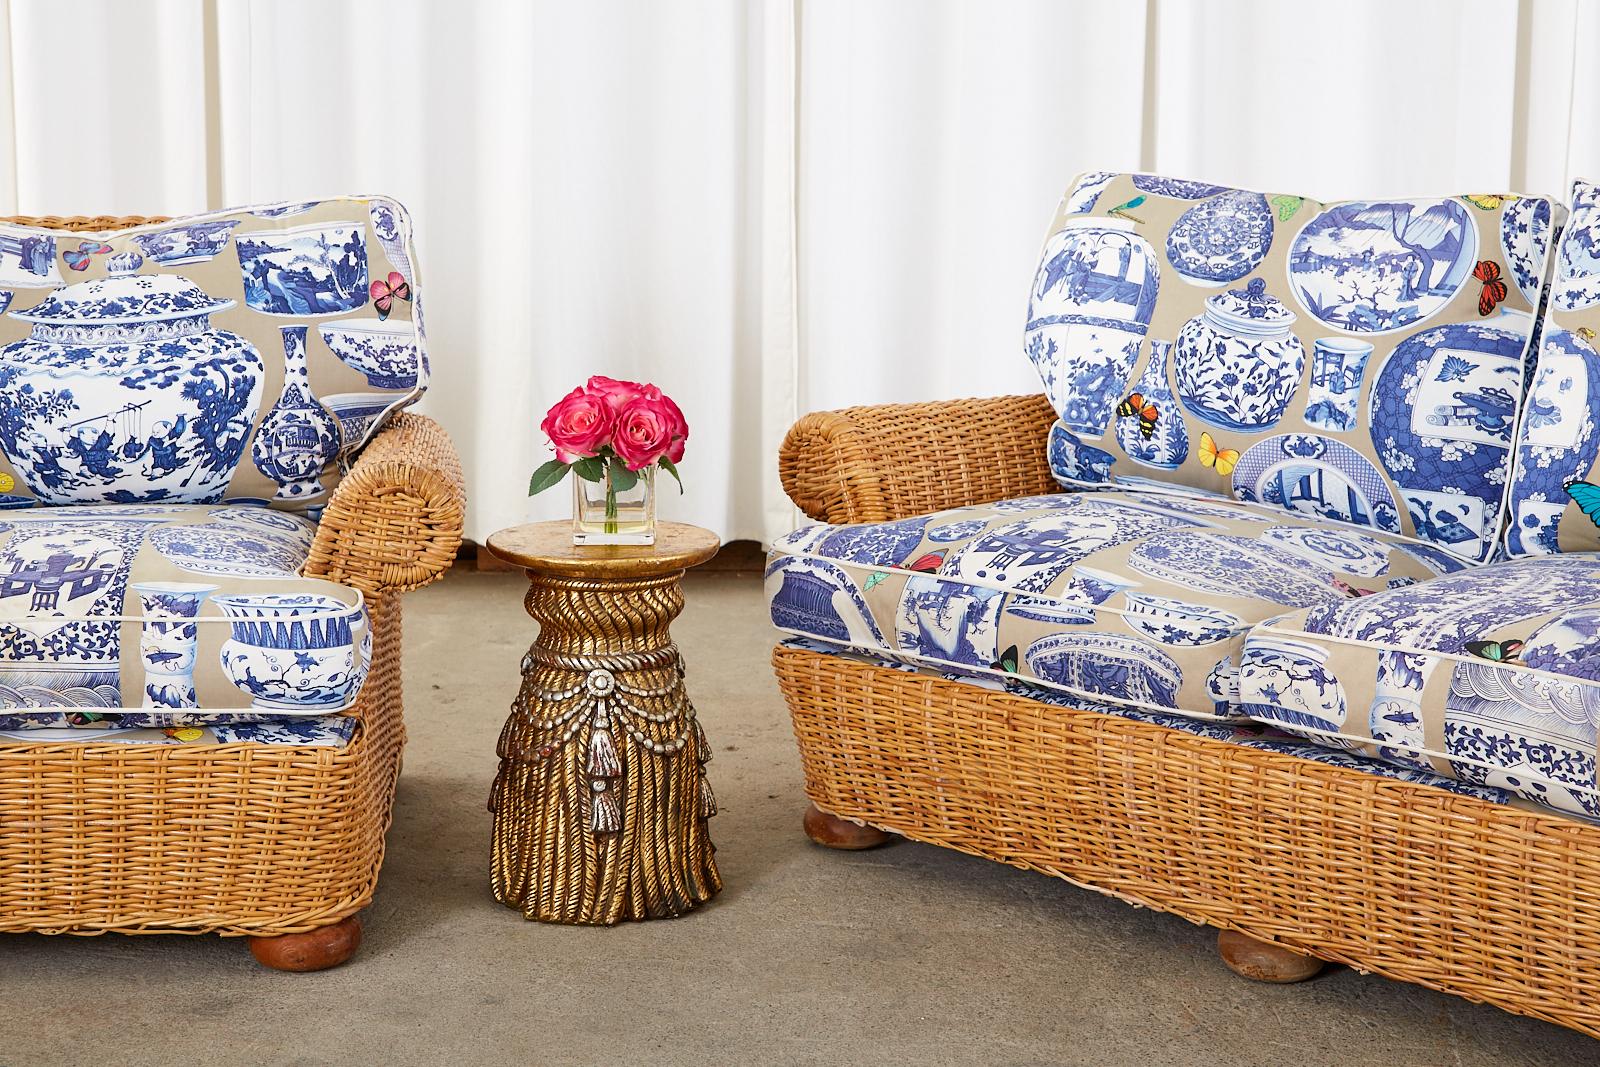 Organic modern living room set consisting of a settee and an armchair featuring chinoiserie style blue and white ginger jar motif fabric. Crafted from rattan frames covered with woven wicker. The set has generous seating areas topped with thick